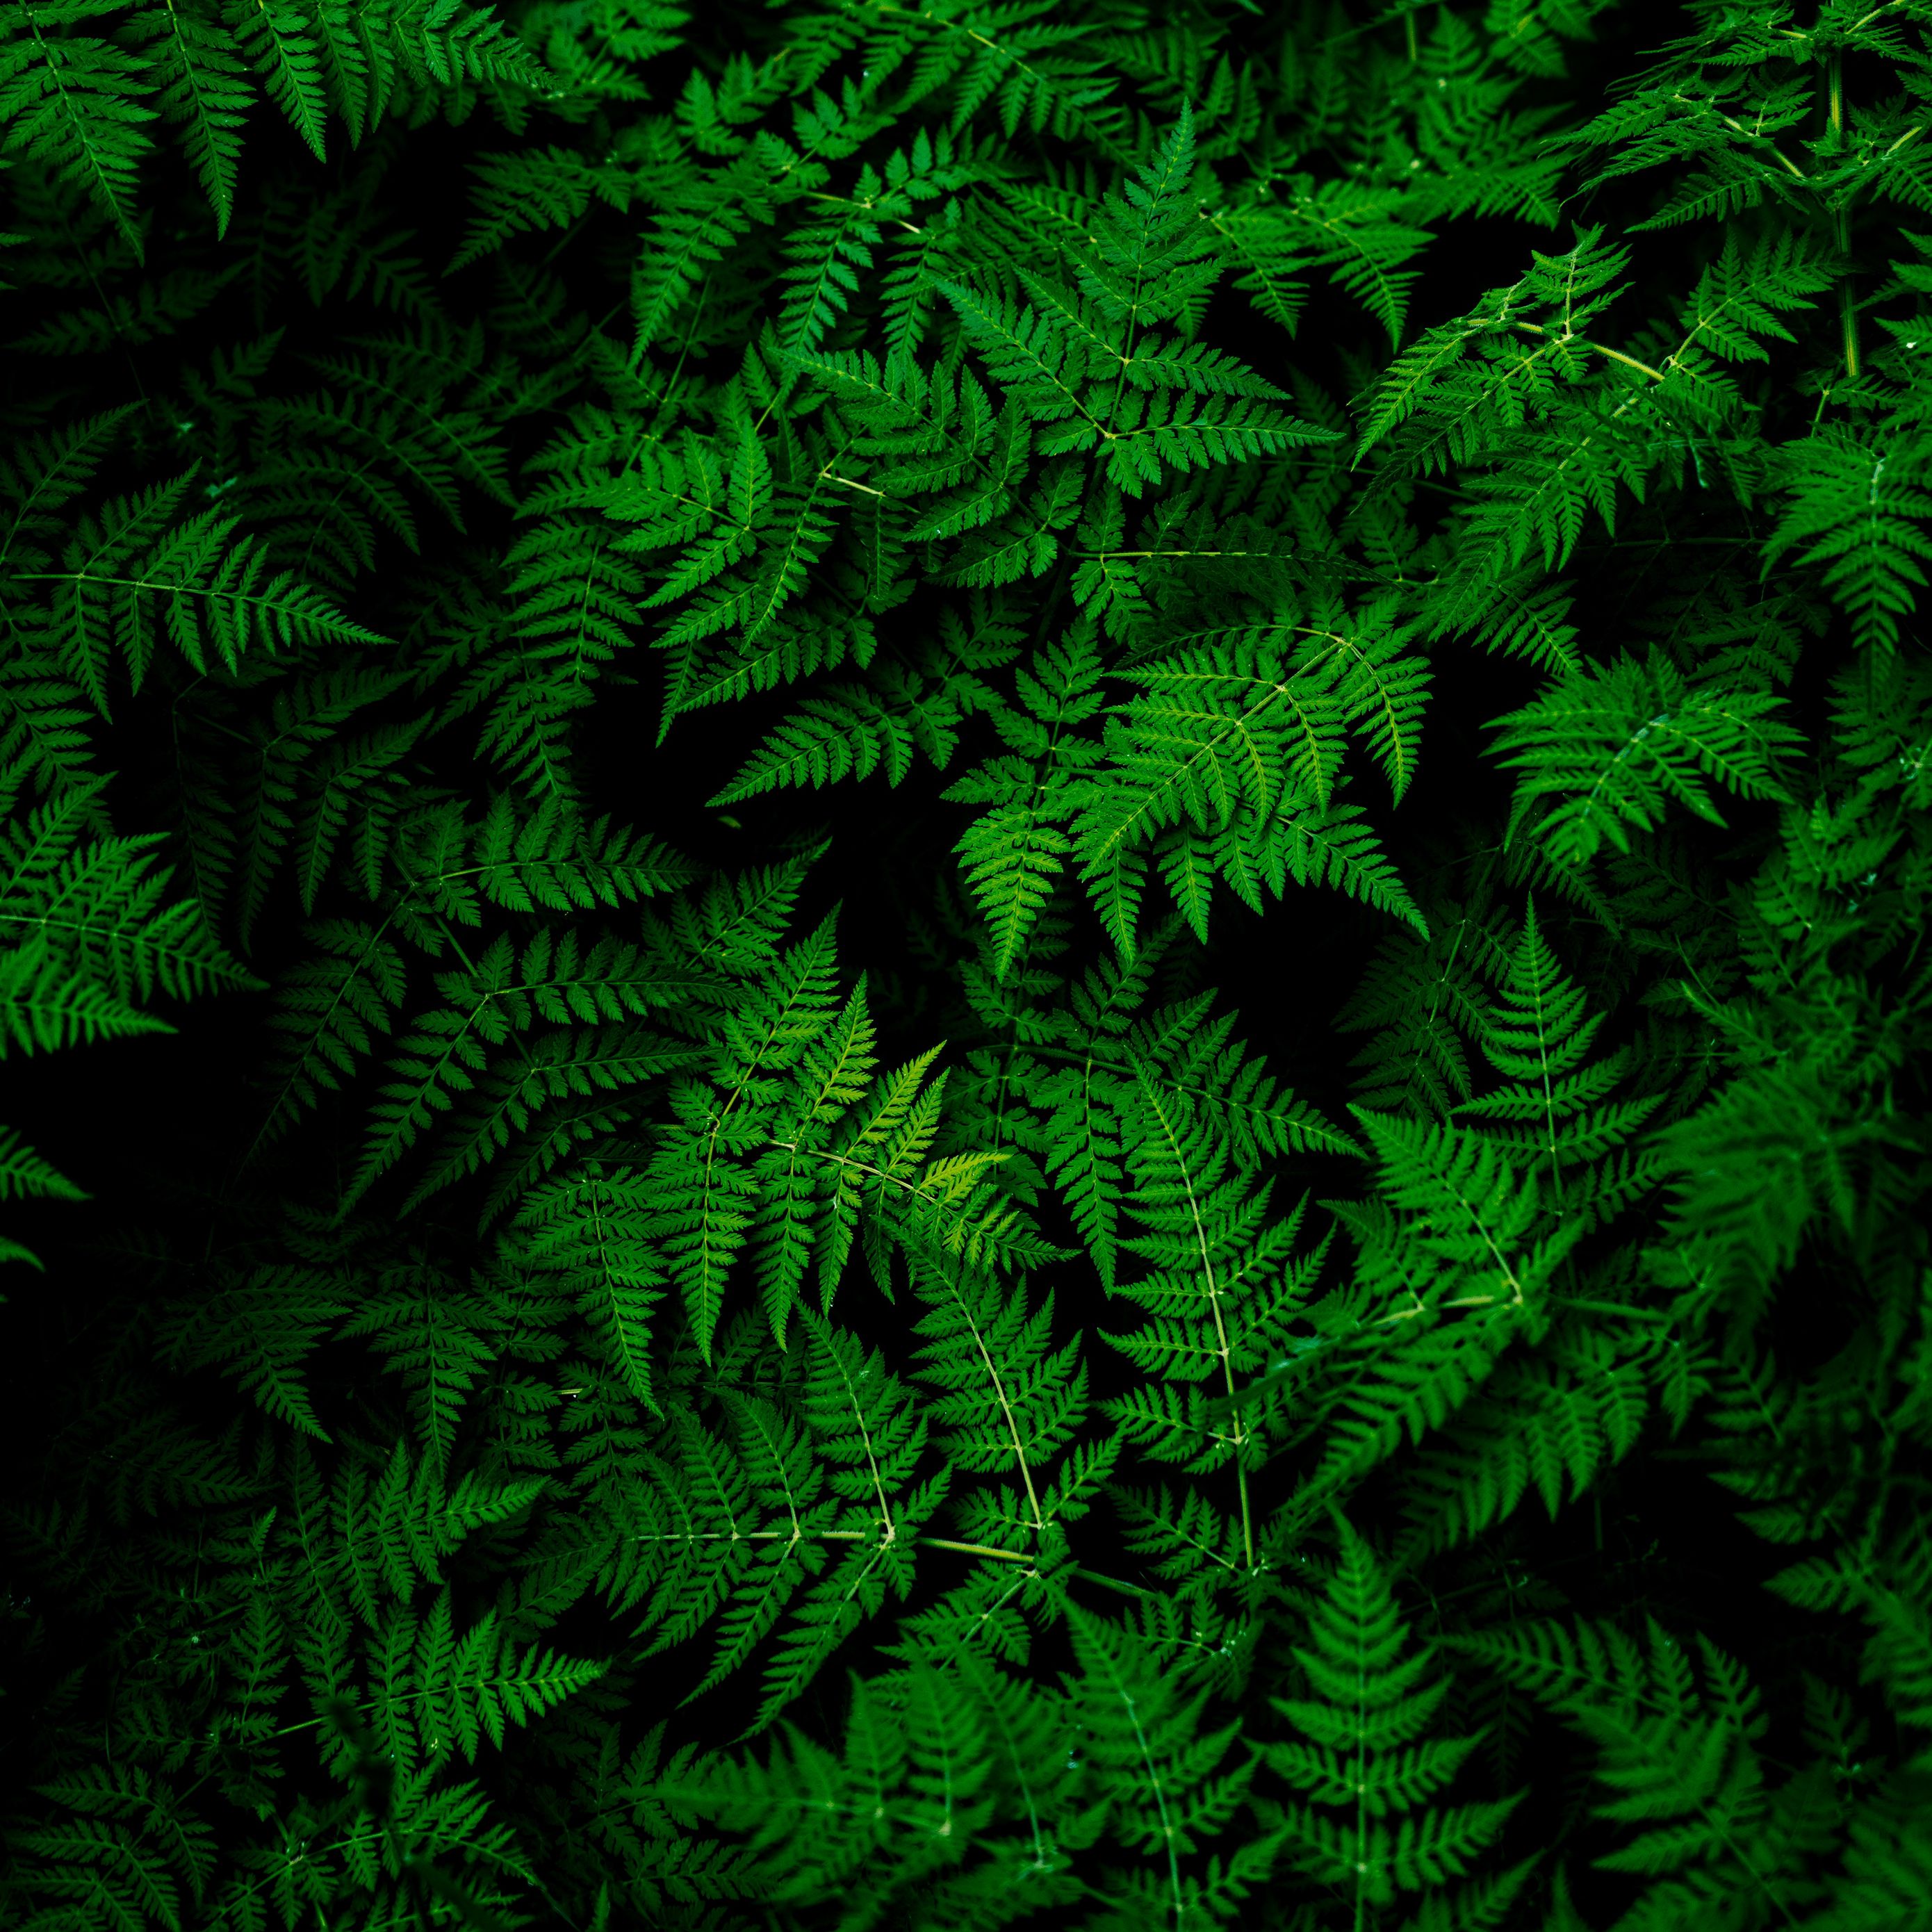 Download wallpaper 2780x2780 leaves, plant, green ipad air, ipad air ipad ipad ipad mini ipad mini ipad mini ipad pro 9.7 for parallax HD background